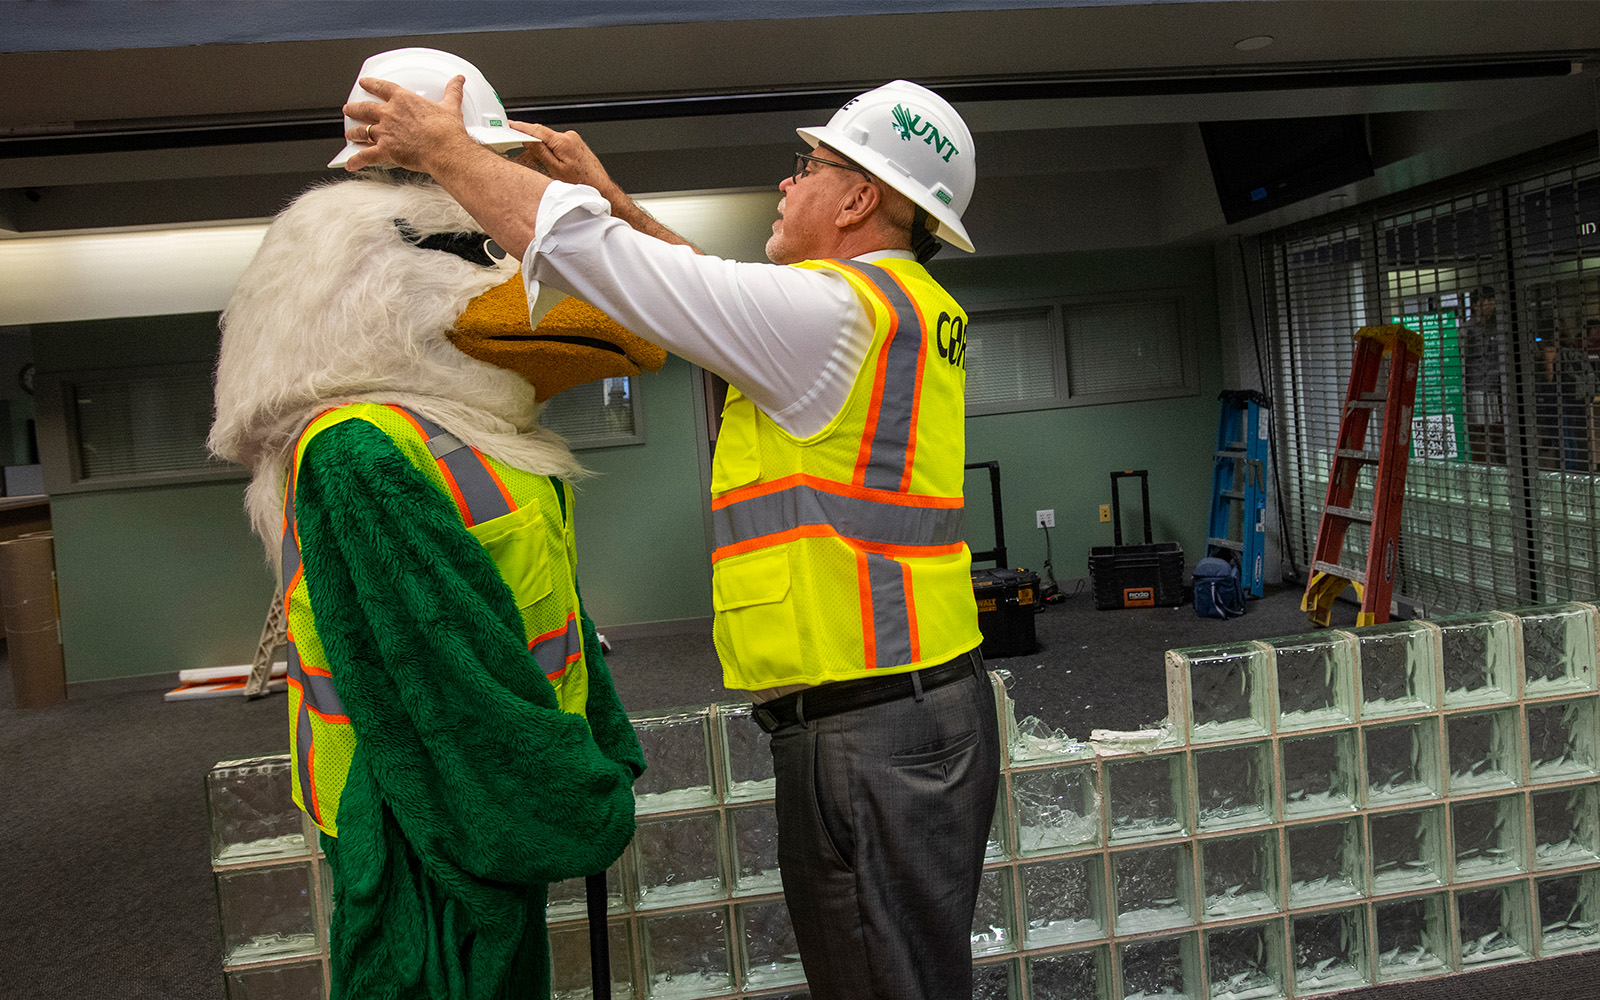 UNT President Smatresk and Scrappy stand ready to start renovation.